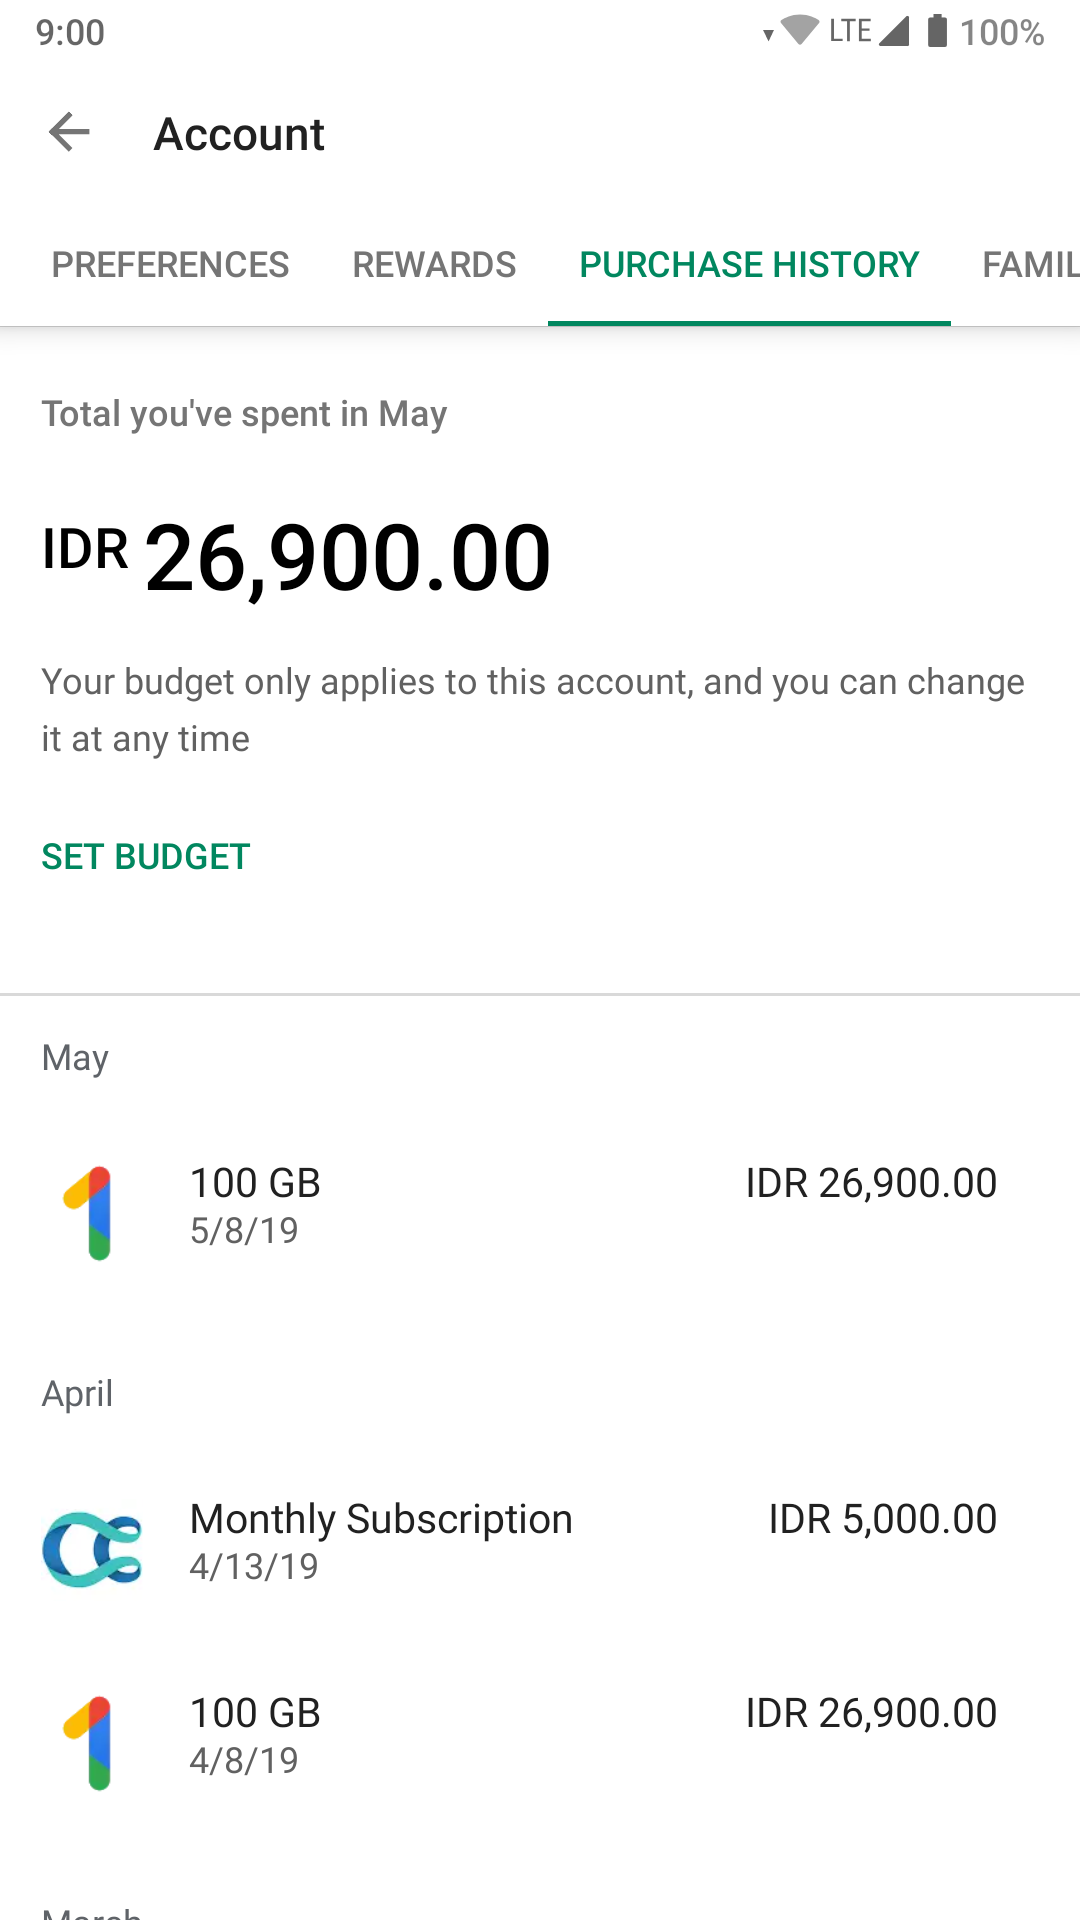 Play Store - Budget